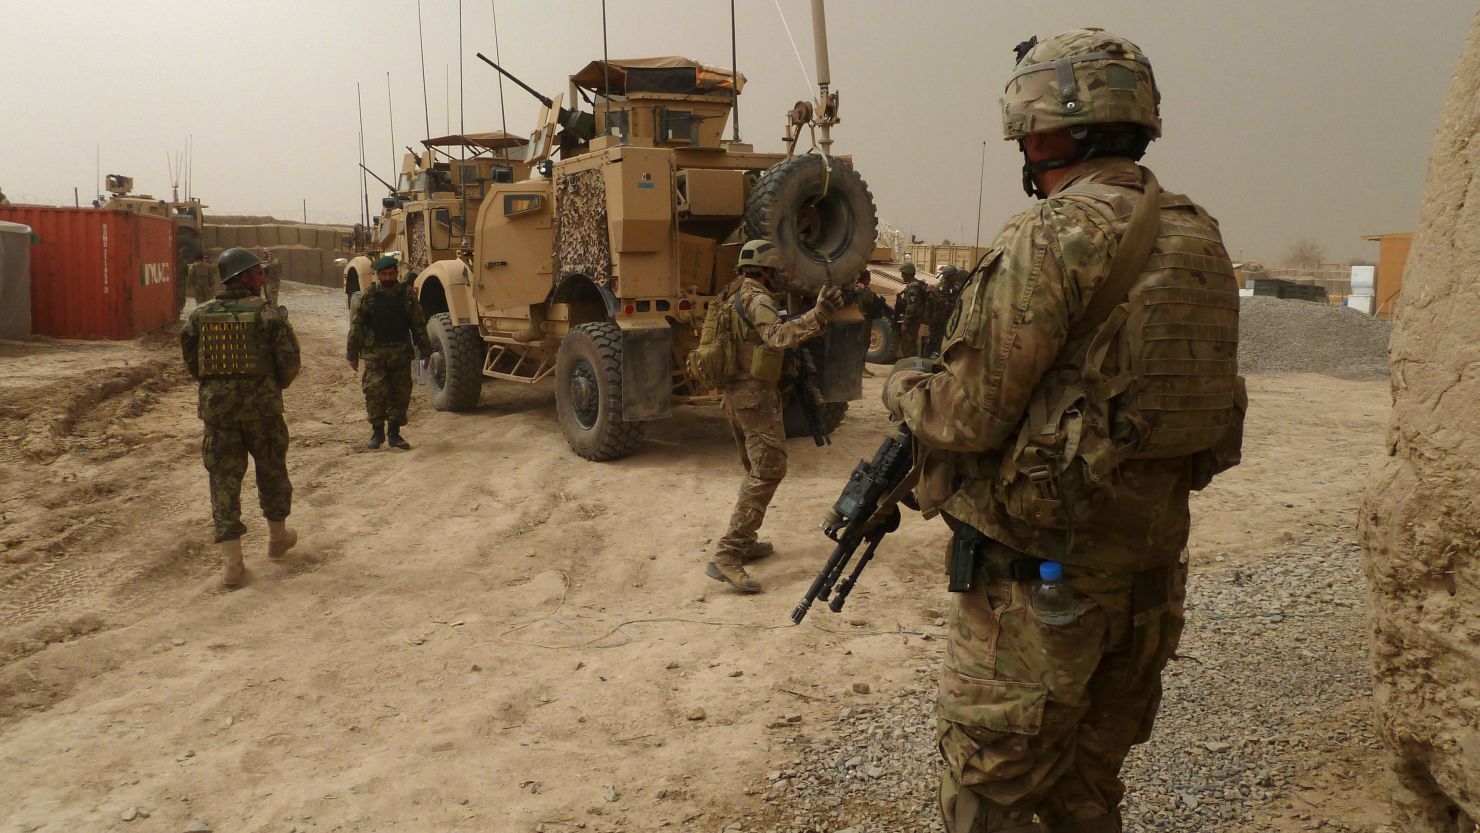 U.S. soldiers keep watch at the entrance of a military base near Alkozai village following the shooting of Afghan civilians allegedly committed by a U.S. soldier in Panjwayi district, Kandahar province on March 11, 2012. 